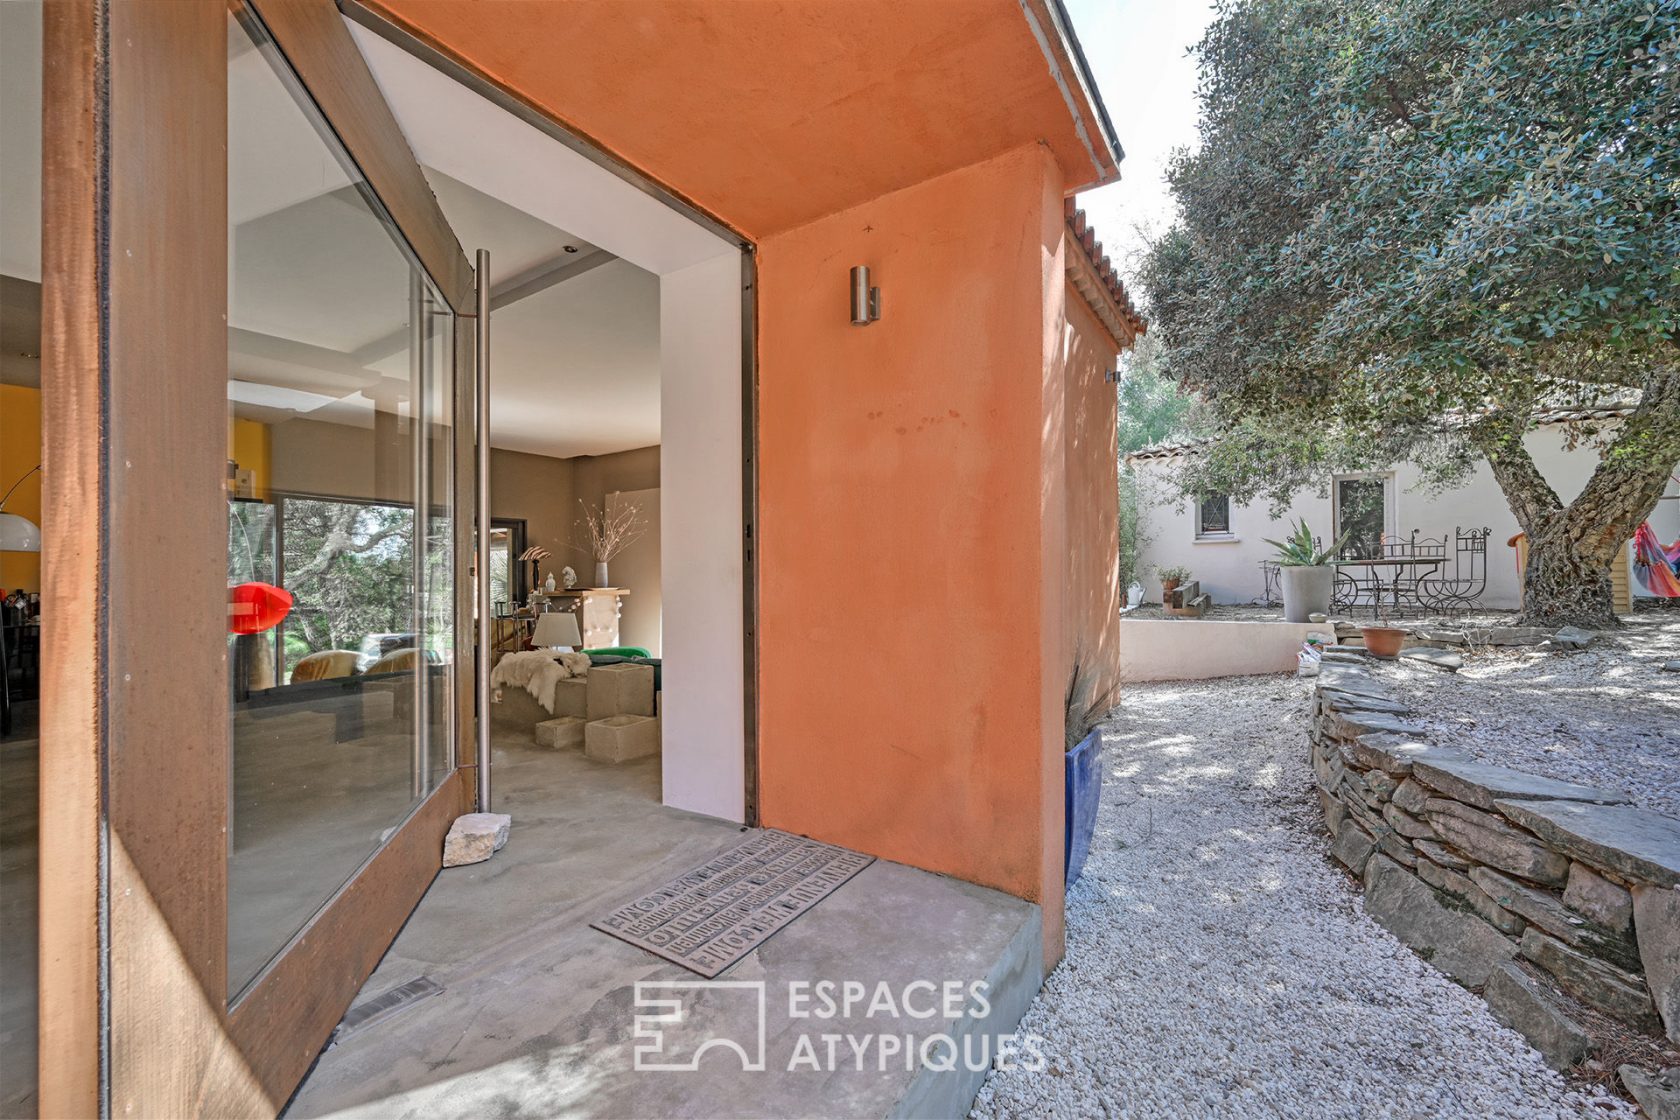 Lovely farmhouse in the heart of the garrigue